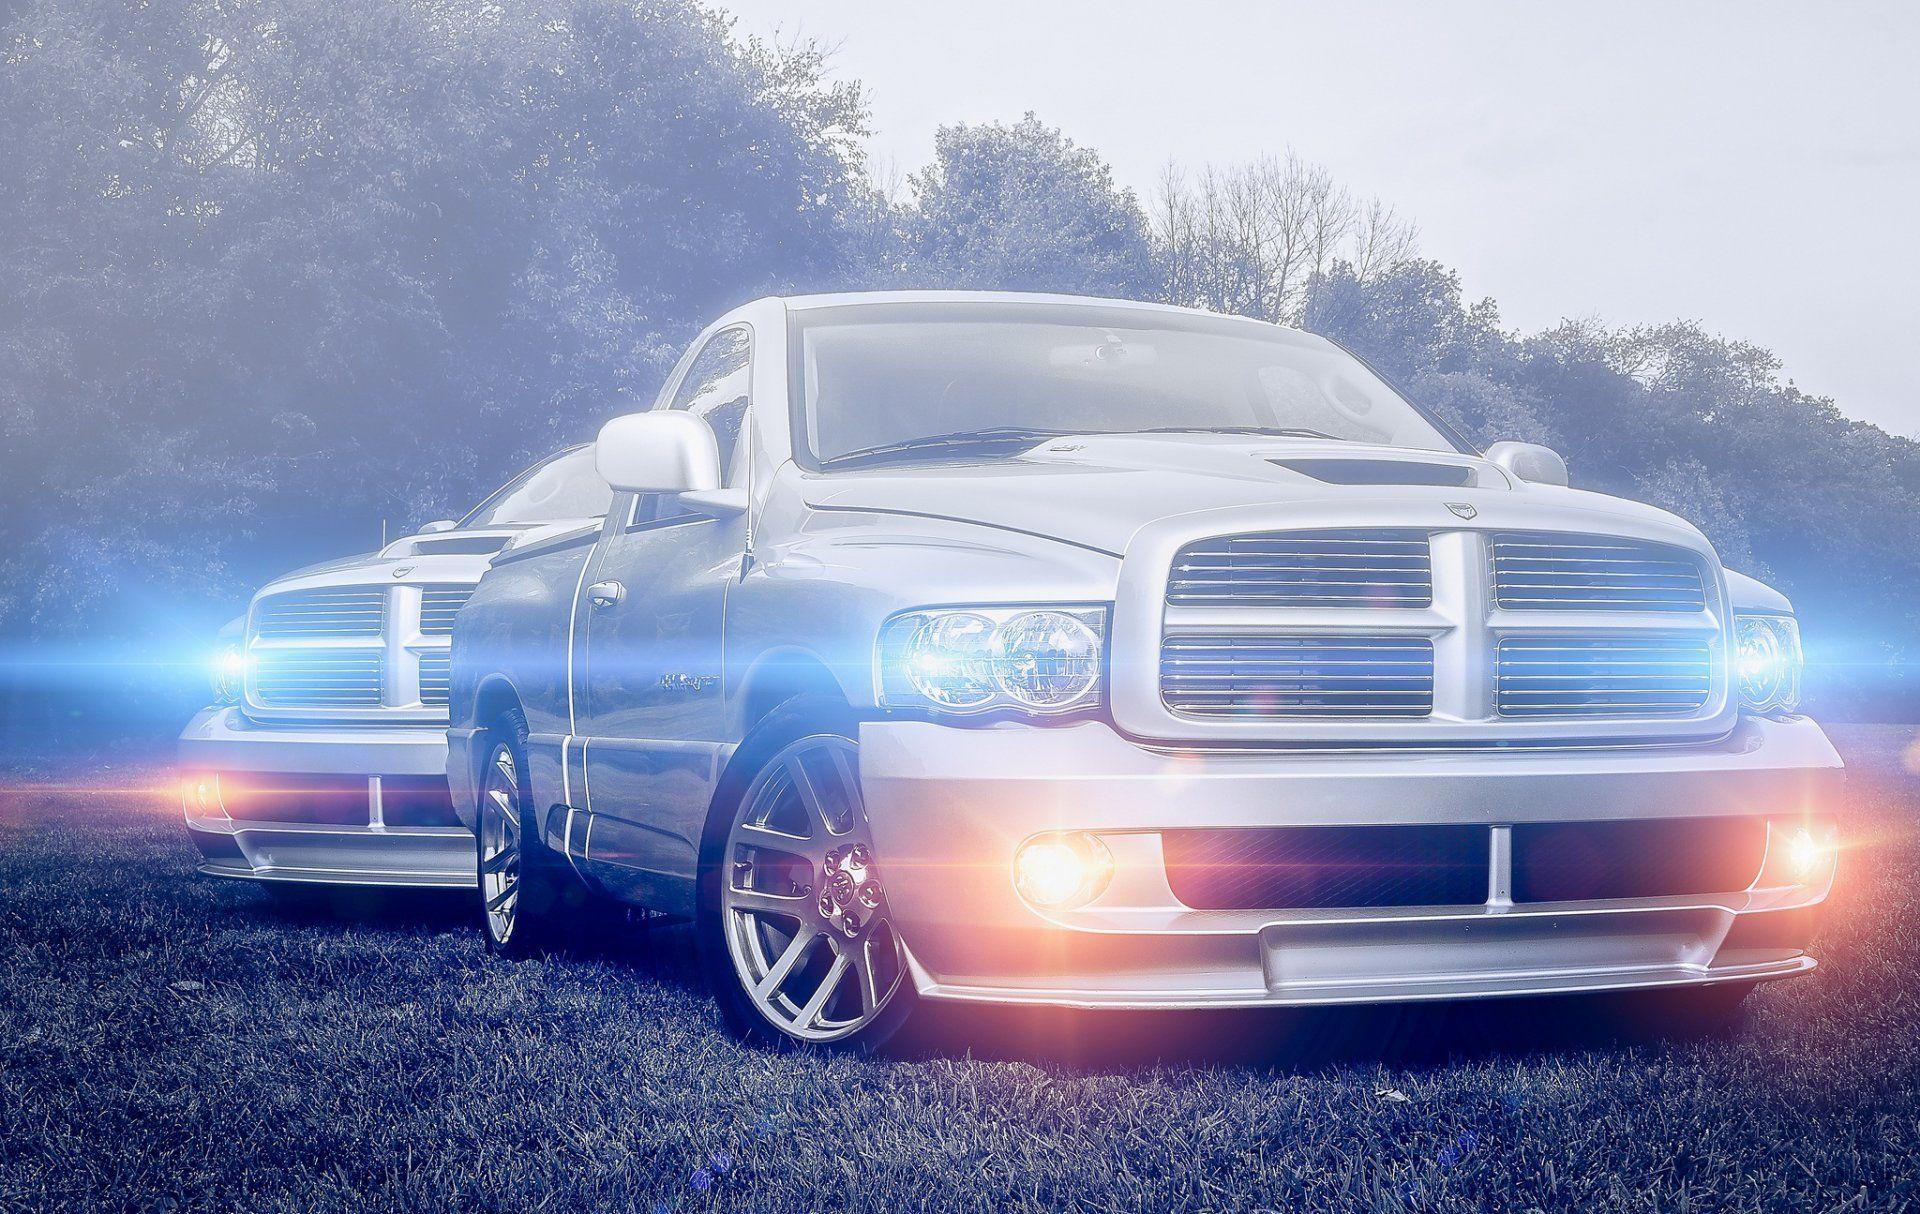 Dodge ram silvery front pickup dodge silver truck reflections HD